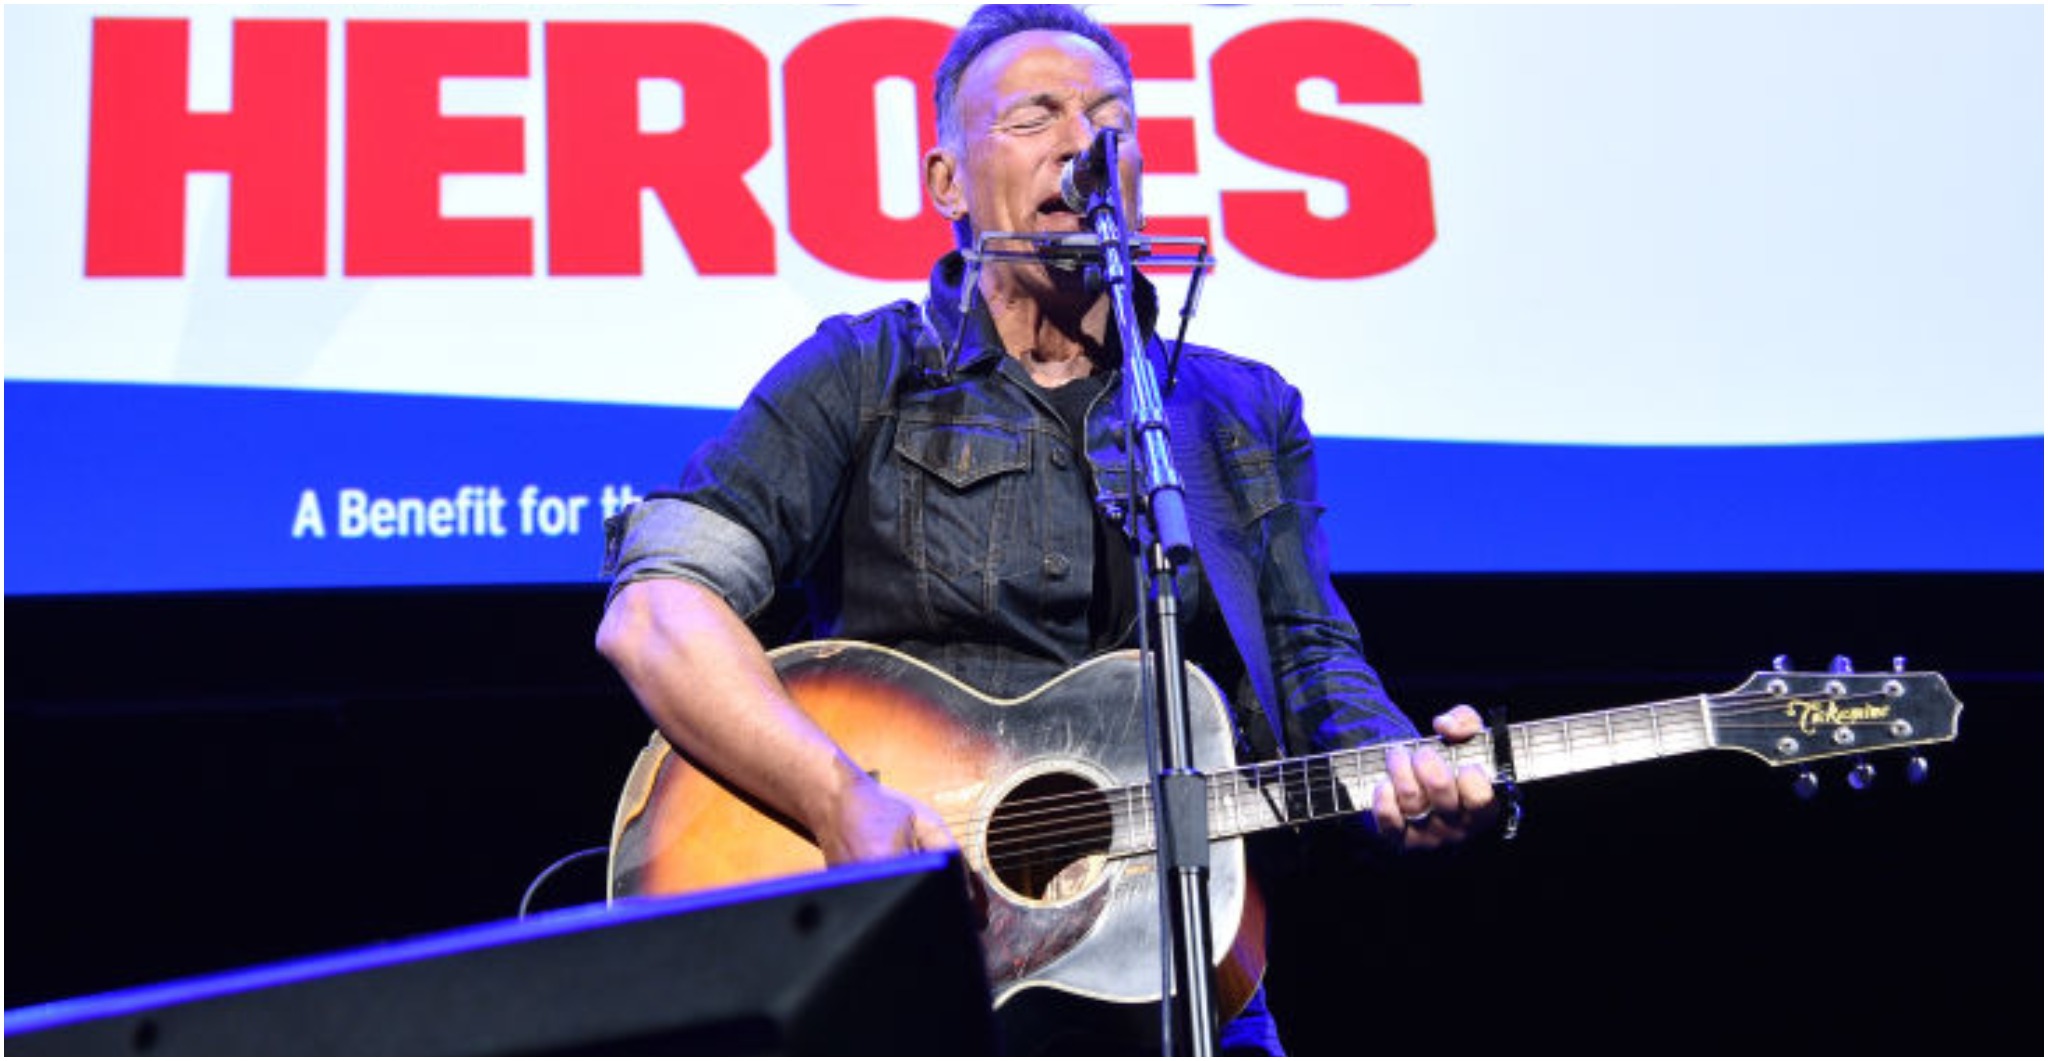 Bruce Springsteen at the 13th annual Stand Up for Heroes to benefit the Bob Woodruff Foundation in 2019. (Photo by Bryan Bedder/Getty Images for The Bob Woodruff Foundation)